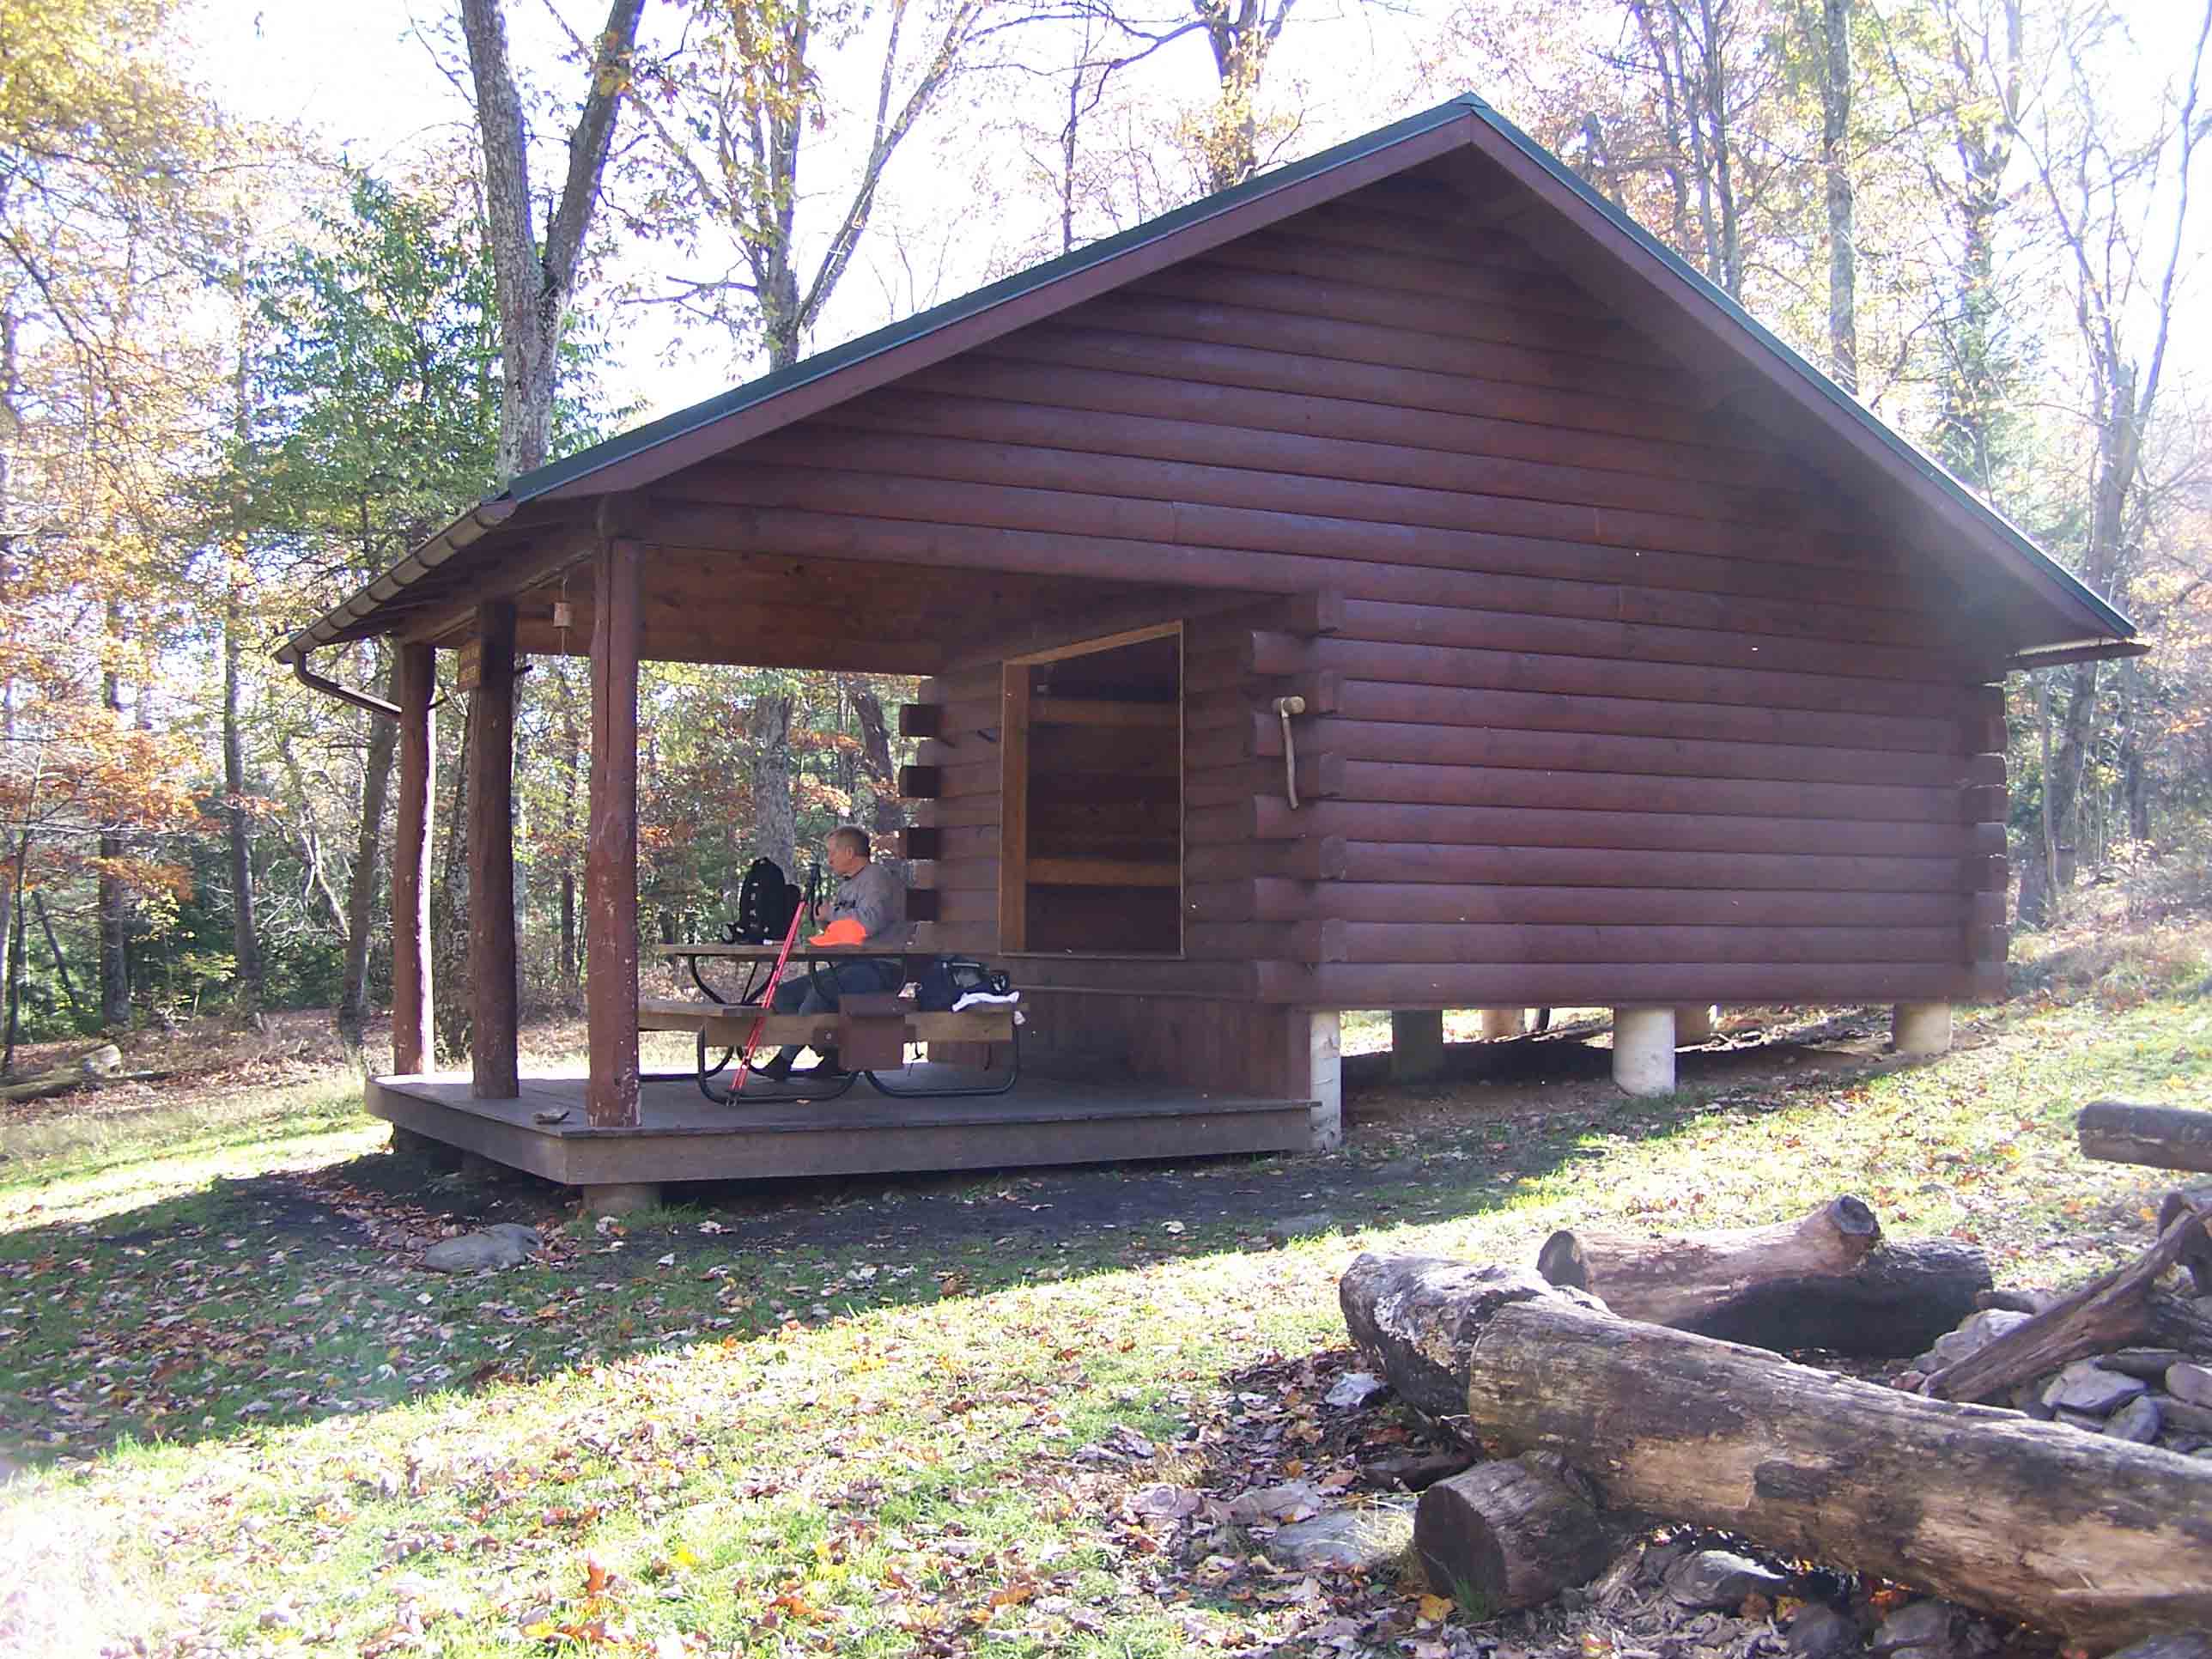 Birch Run Shelter mm 9.7. Courtesy at@rohland.org